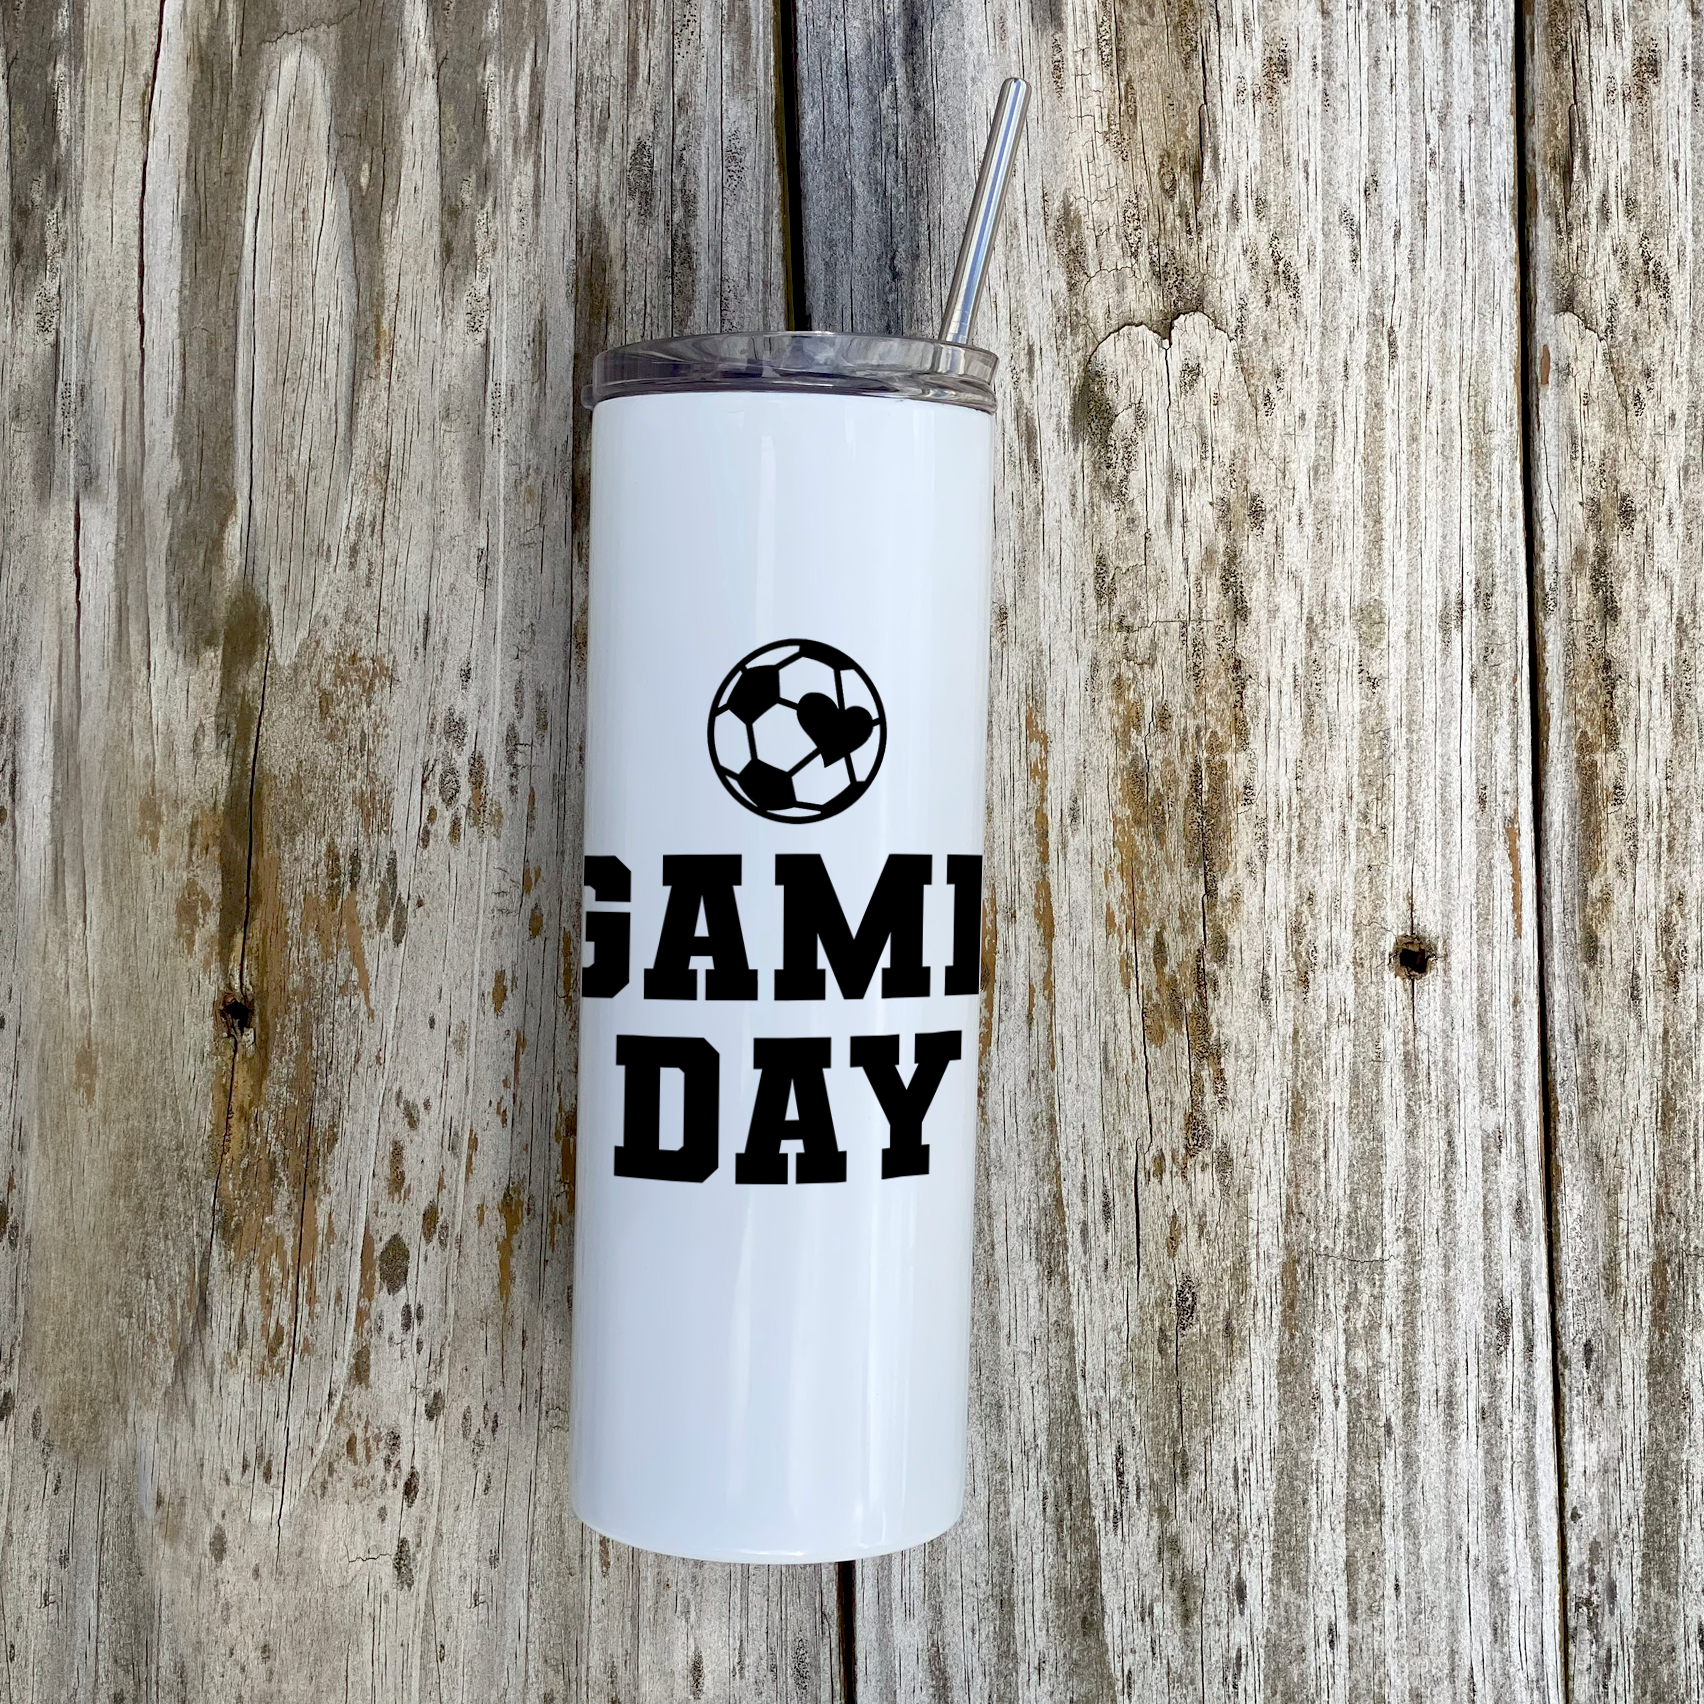 Sports Collection (Soccer Game Day - Personalized) 20 Oz Stainless Steel Travel Tumbler with Straw (White)